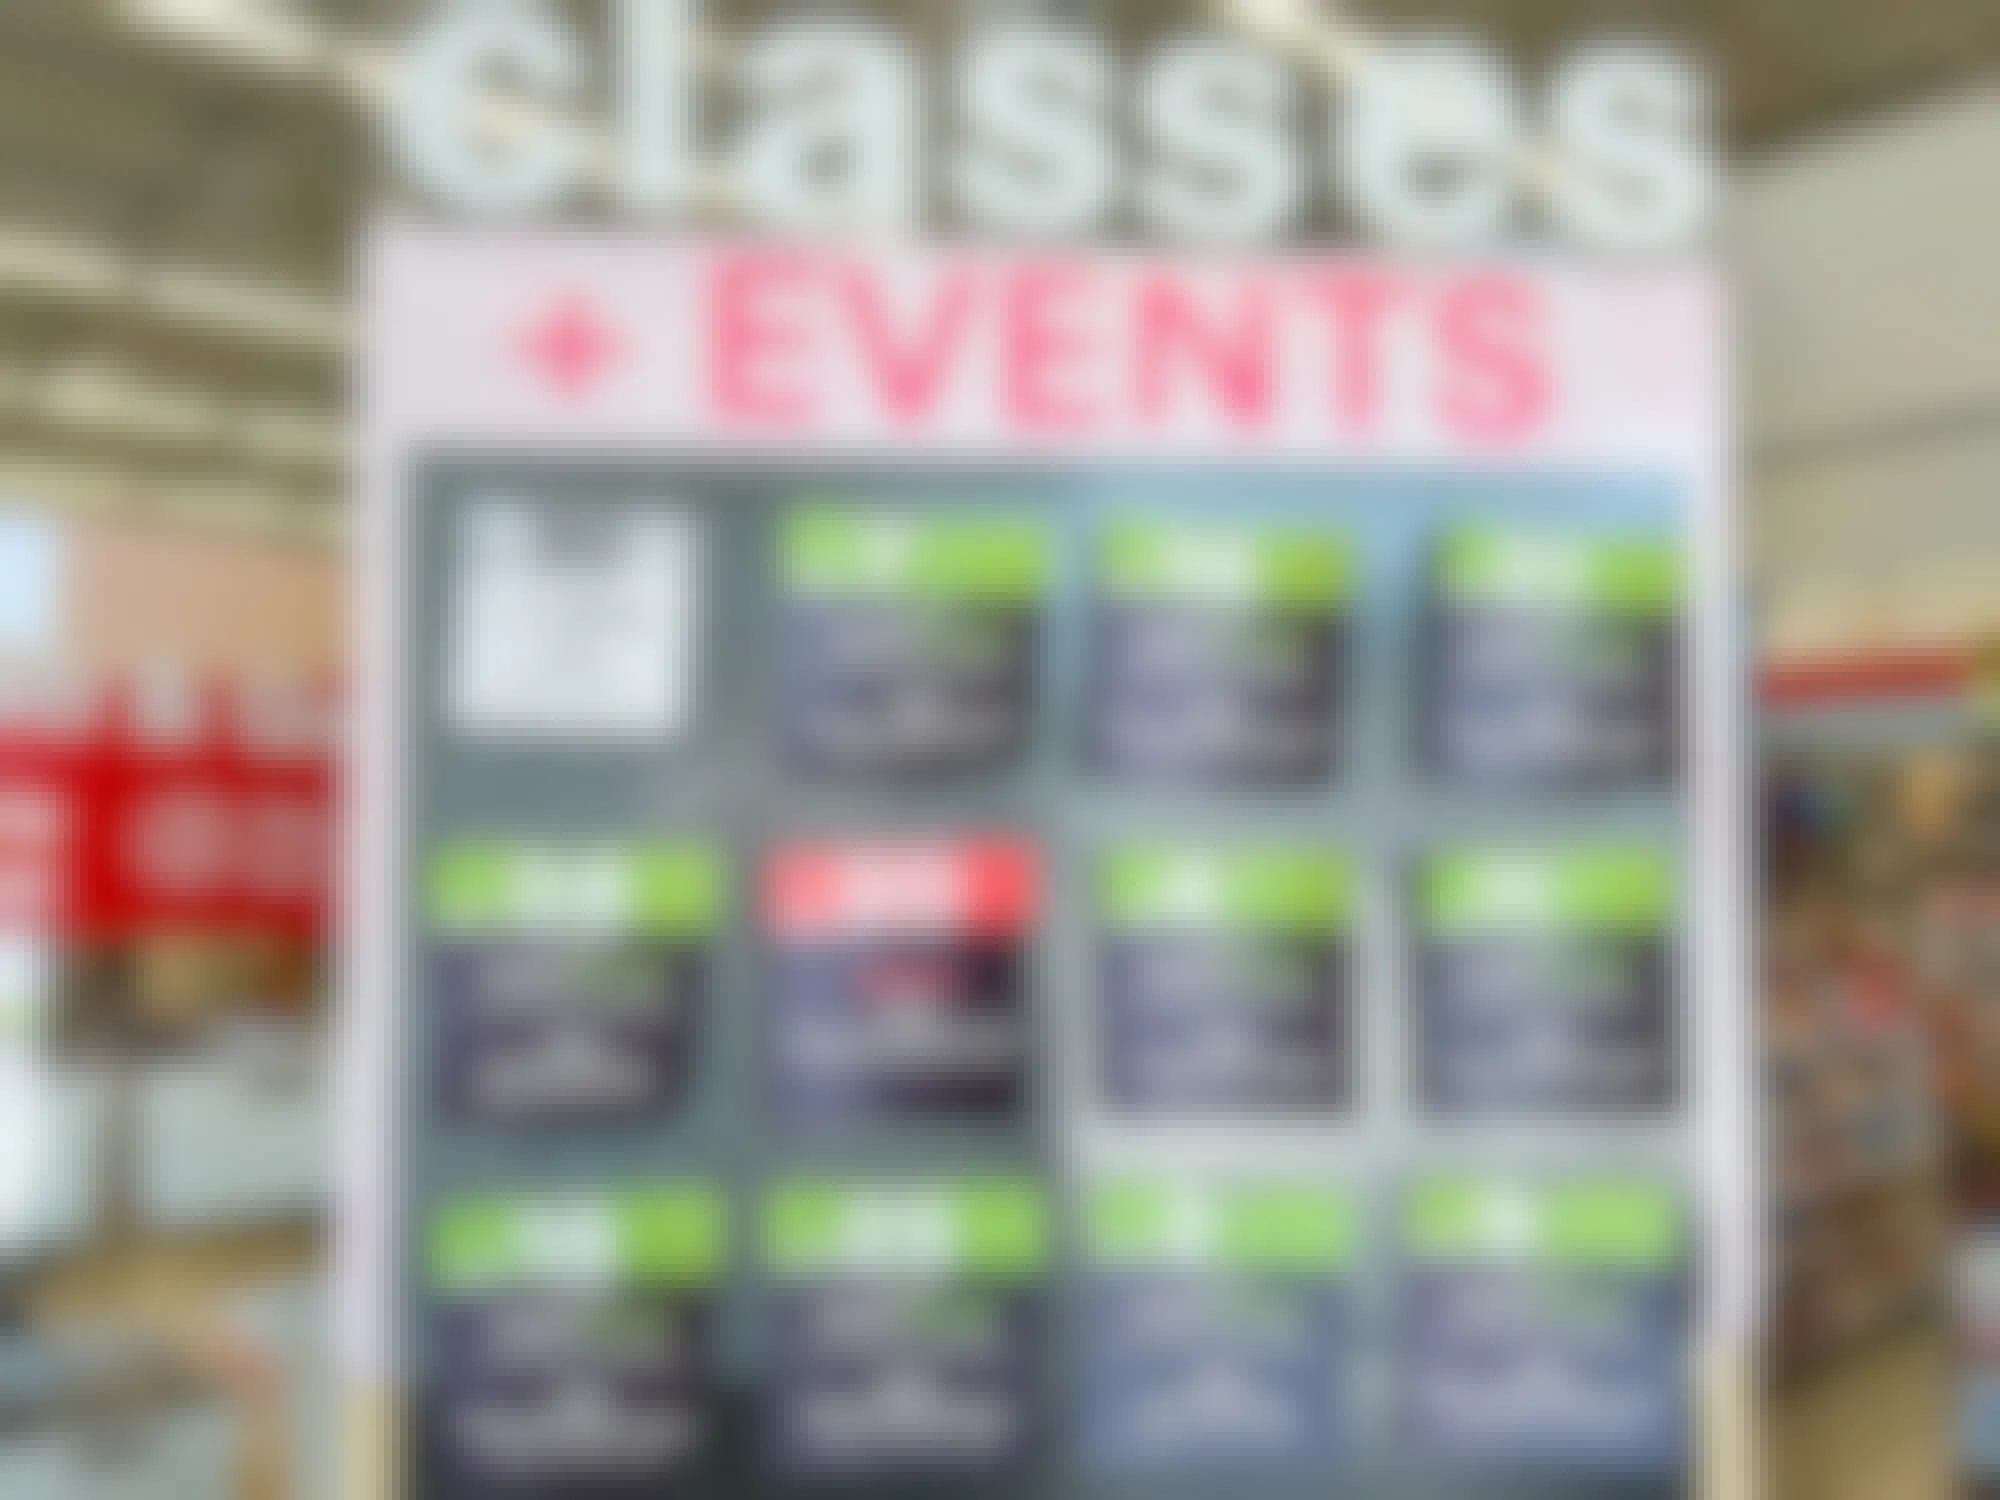 A display of signs showing the dates of all coming up Michaels events and classes